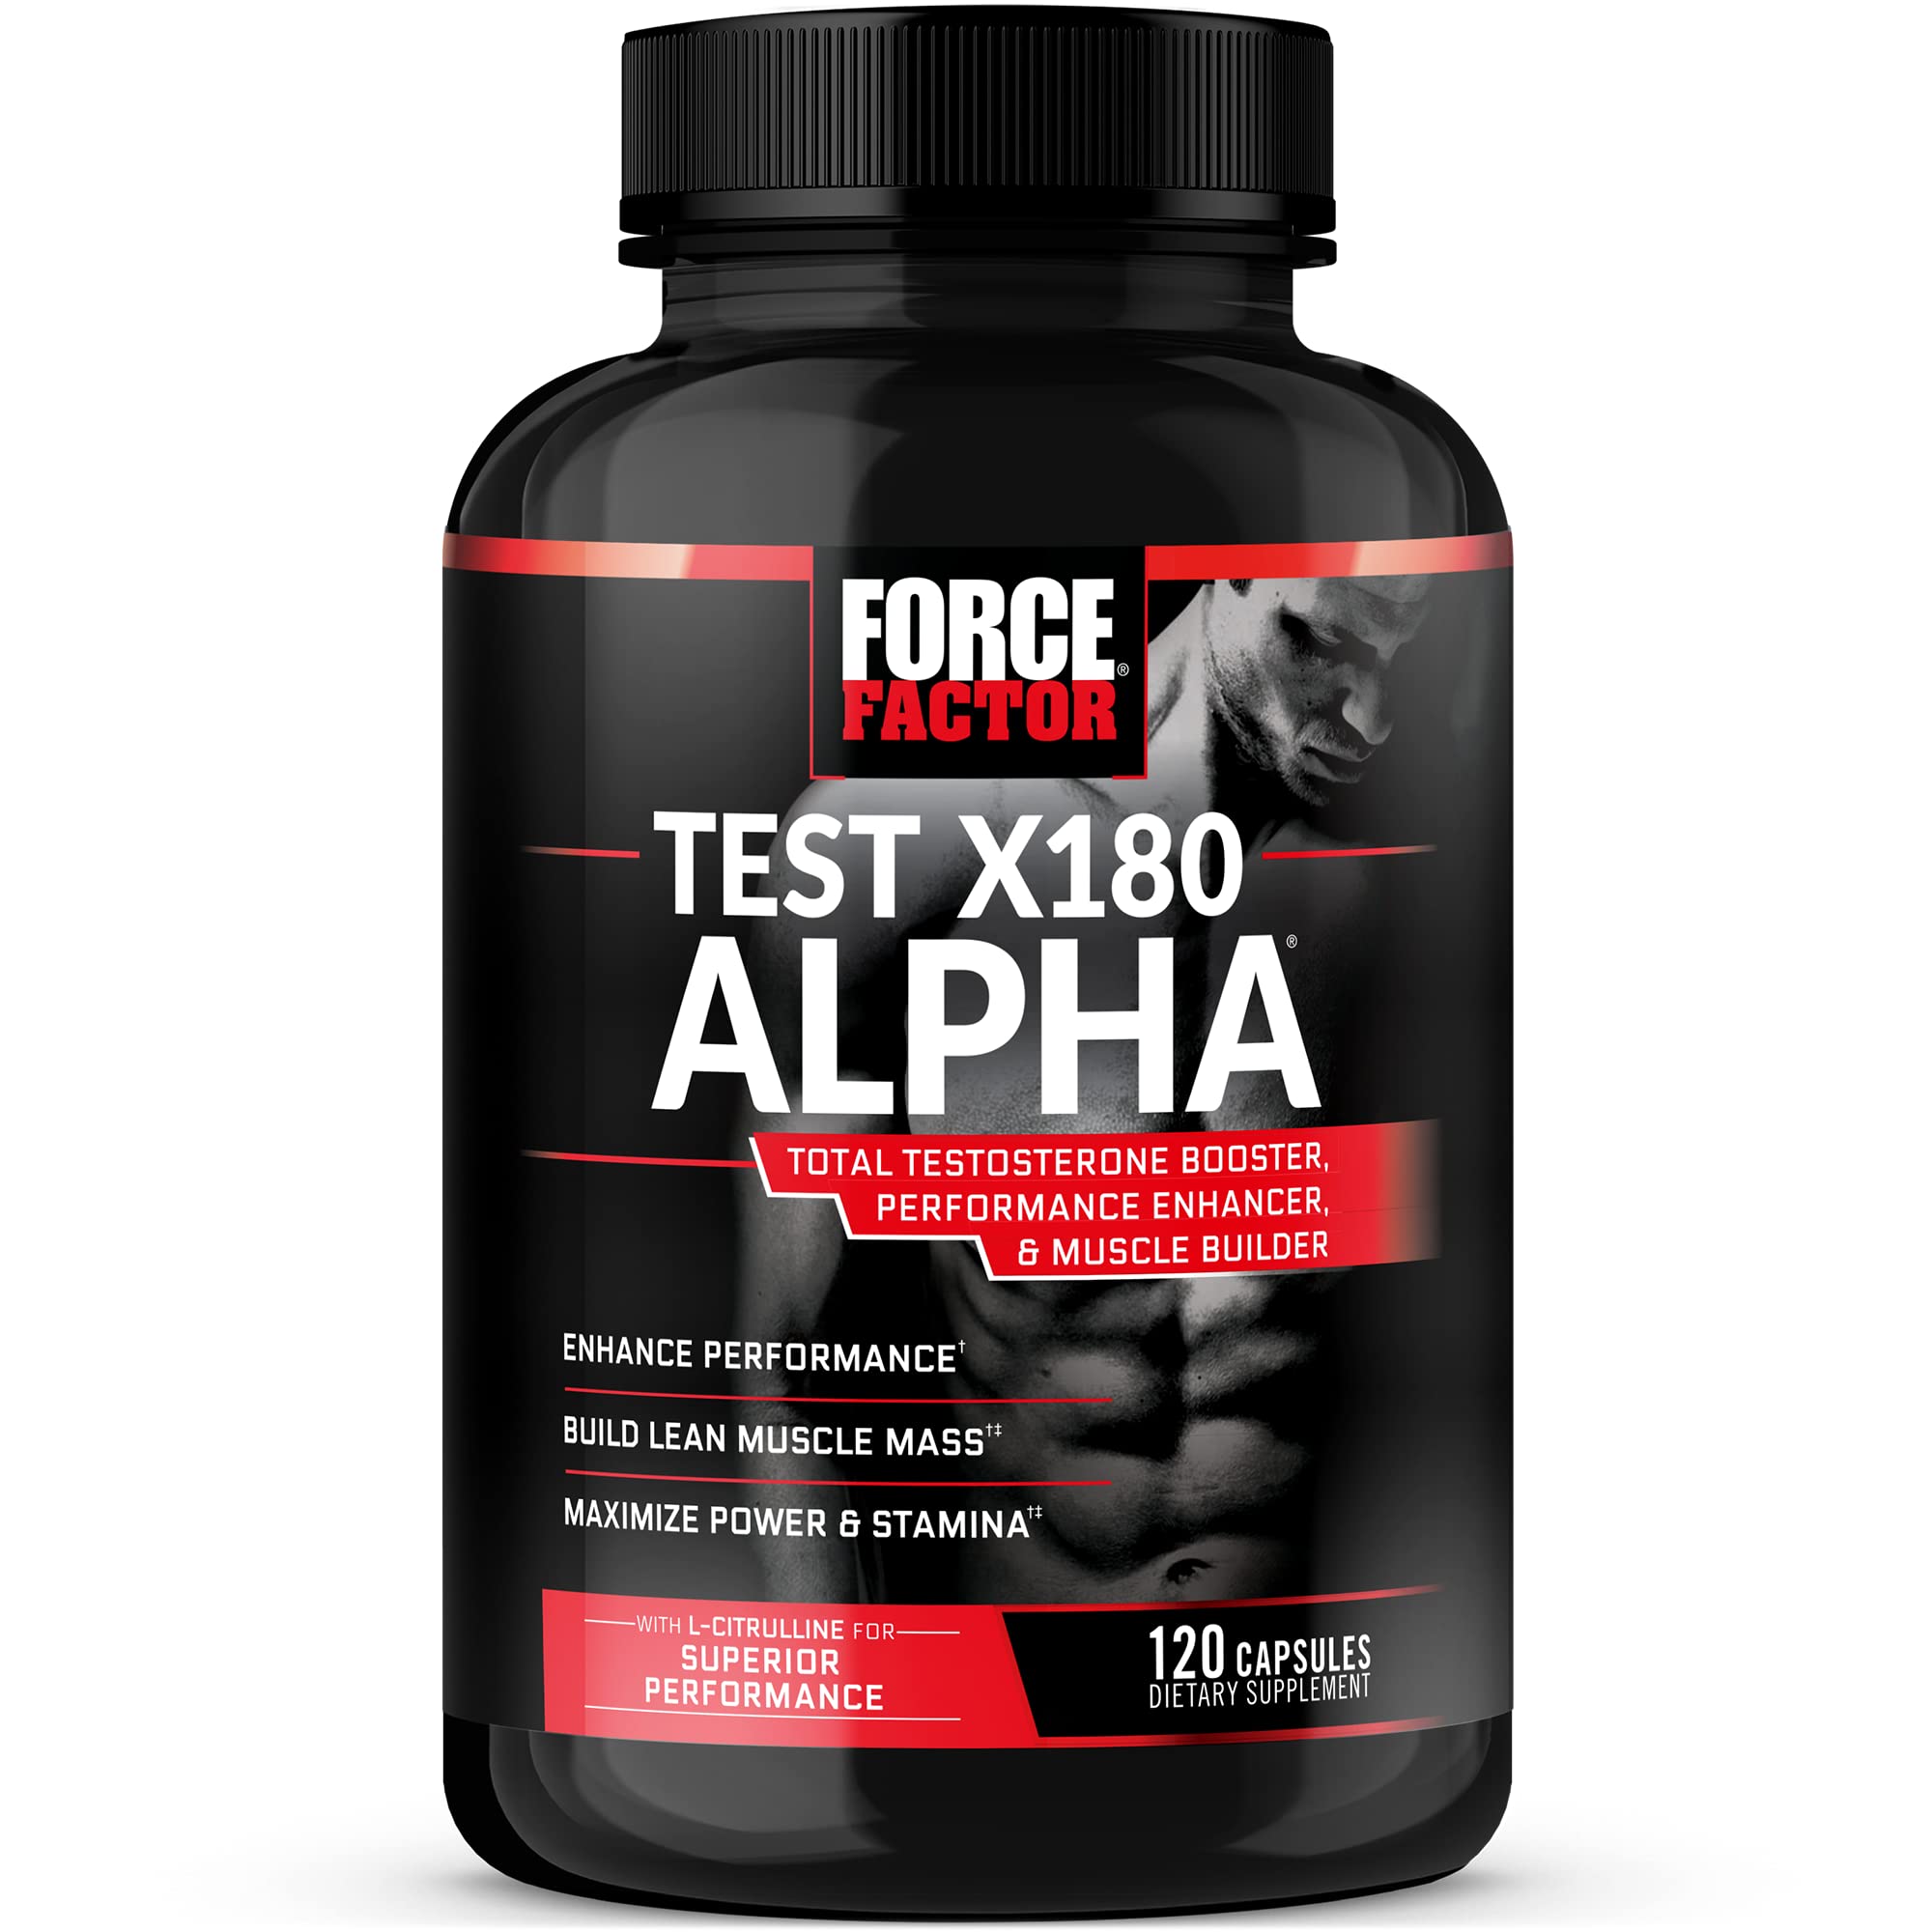 Force Factor Test X180 Alpha Testosterone Booster for Men, Testosterone Supplement to Help Build Lean Muscle, Increase Strength and Power, 120 Capsules, (Package May Vary)